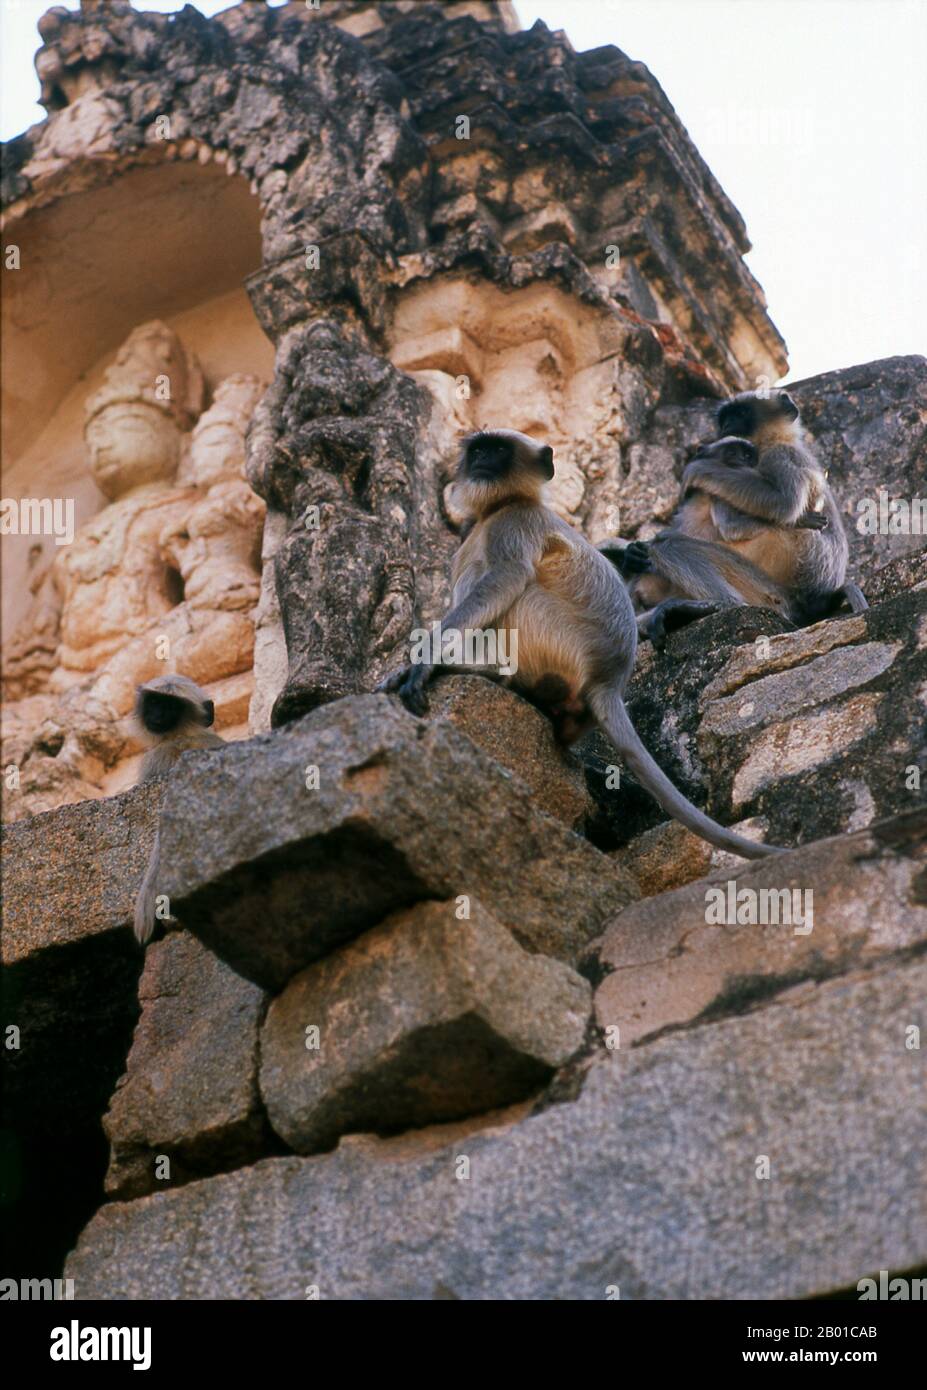 India: Gray langurs (also known as Hanuman langurs) at Virupaksha Temple, Hampi, Karnataka State.  Gray langurs or Hanuman langurs are the most widespread langurs of South Asia.  The Virupaksha Temple (also known as the Pampapathi Temple) is Hampi's main centre of pilgrimage. It is fully intact among the surrounding ruins and is still used in worship. The temple is dedicated to Lord Shiva, known here as Virupaksha, as the consort of the local goddess Pampa who is associated with the Tungabhadra River. Stock Photo